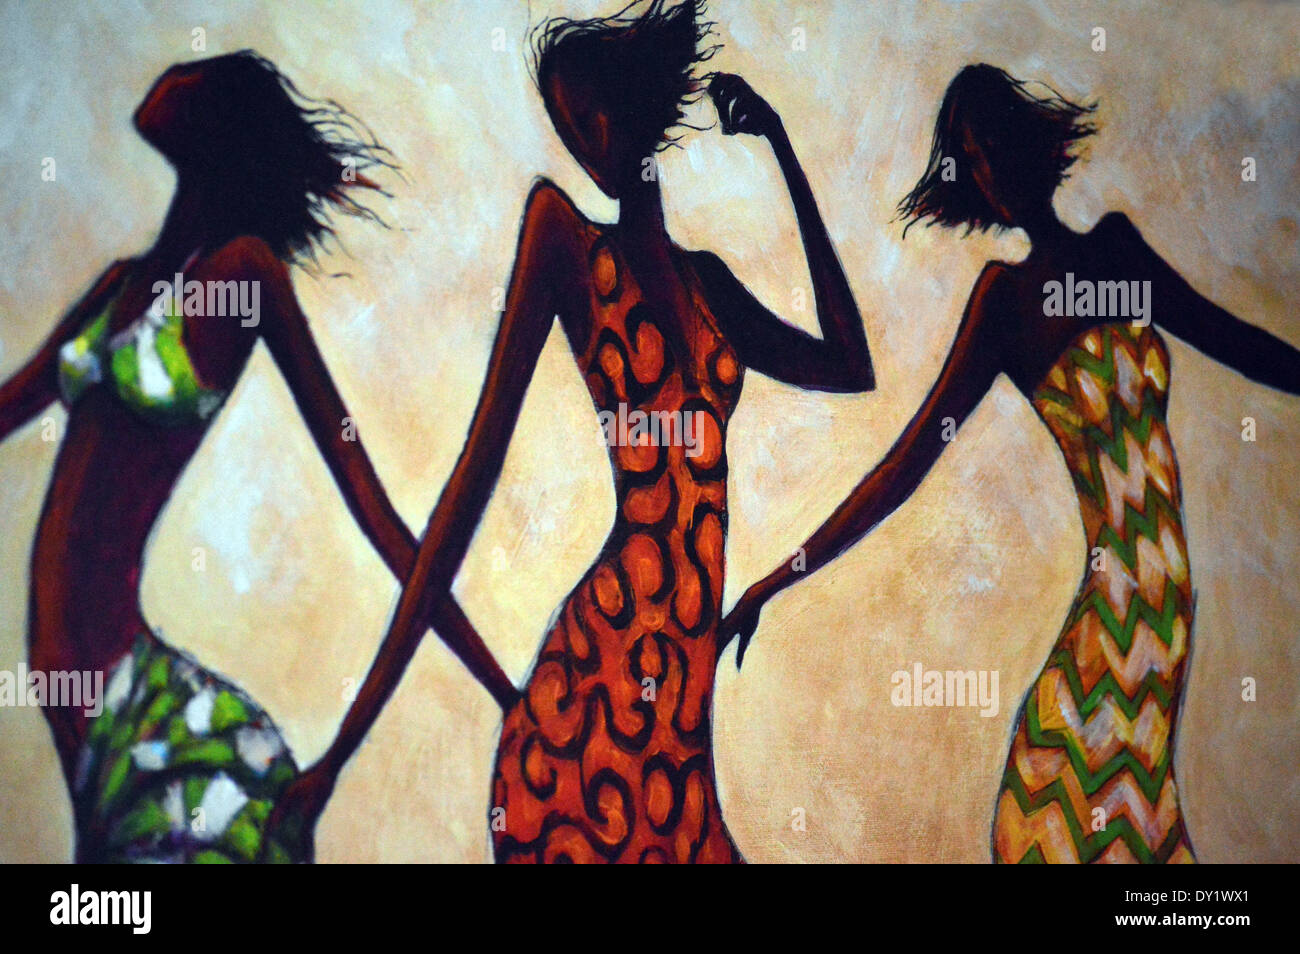 African Art, Painting of Three African Women Dancers on Display in the Hotel Corridor at Riu Touareg Cape Verde Islands Stock Photo